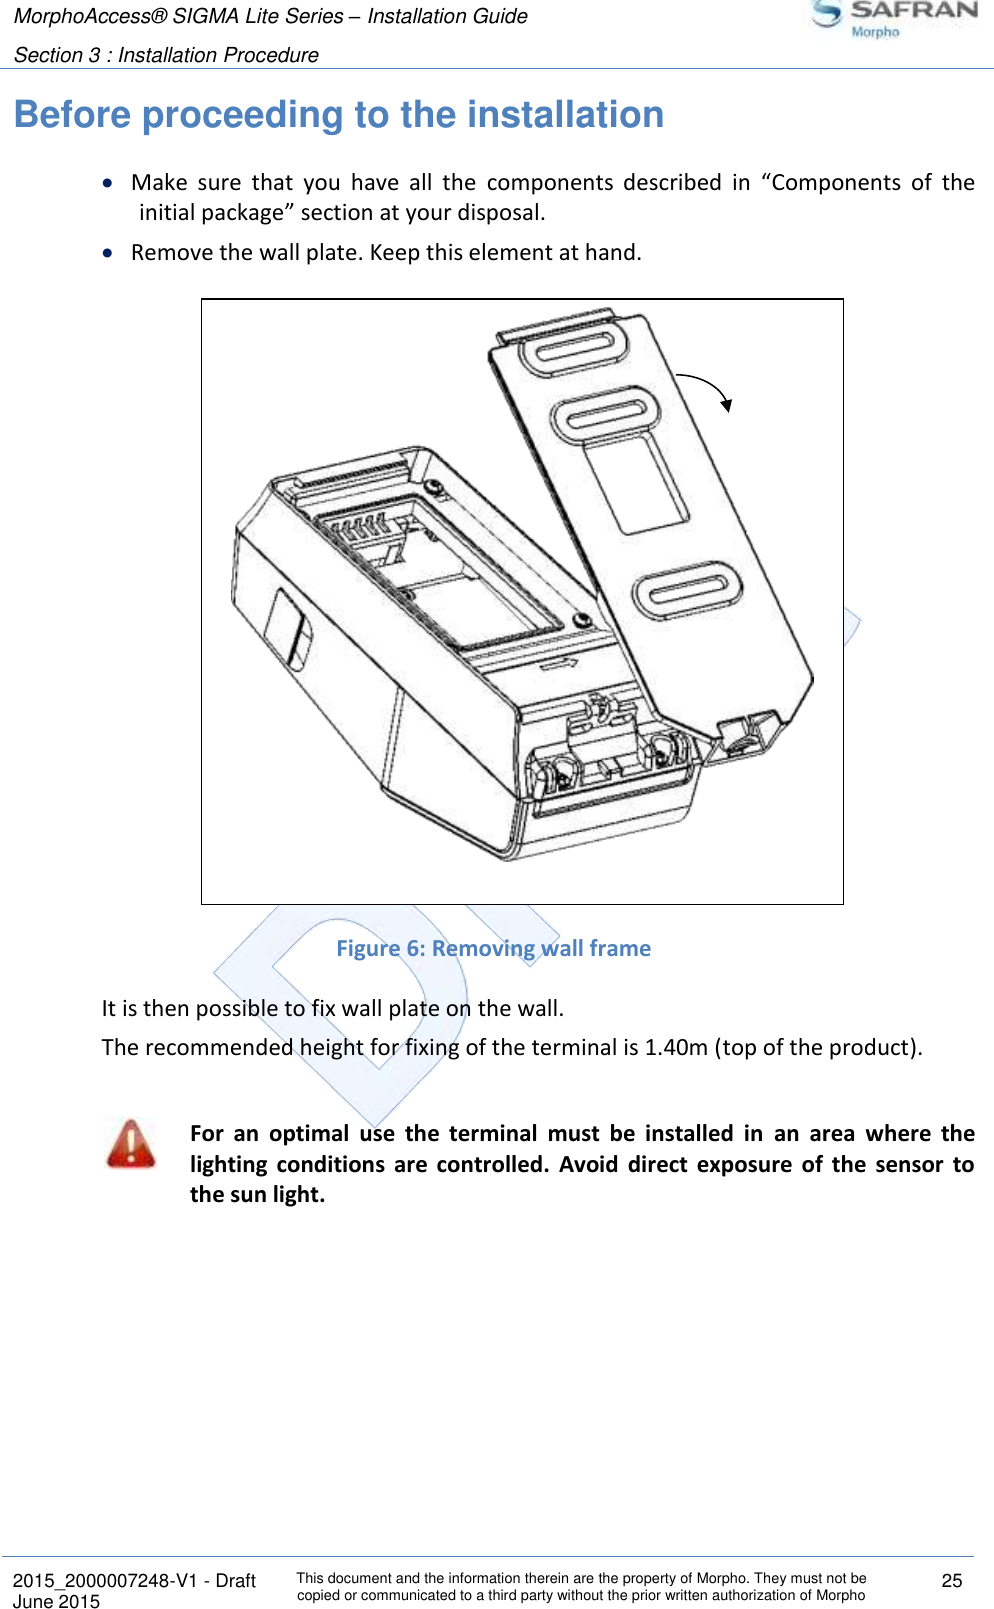 MorphoAccess® SIGMA Lite Series – Installation Guide  Section 3 : Installation Procedure   2015_2000007248-V1 - Draft This document and the information therein are the property of Morpho. They must not be copied or communicated to a third party without the prior written authorization of Morpho 25 June 2015    Before proceeding to the installation  Make  sure  that  you  have  all  the  components  described  in  “Components  of  the initial package” section at your disposal.  Remove the wall plate. Keep this element at hand.                 Figure 6: Removing wall frame It is then possible to fix wall plate on the wall. The recommended height for fixing of the terminal is 1.40m (top of the product).   For  an  optimal  use  the  terminal  must  be  installed  in  an  area  where  the lighting  conditions  are  controlled.  Avoid  direct  exposure  of  the  sensor  to the sun light.  